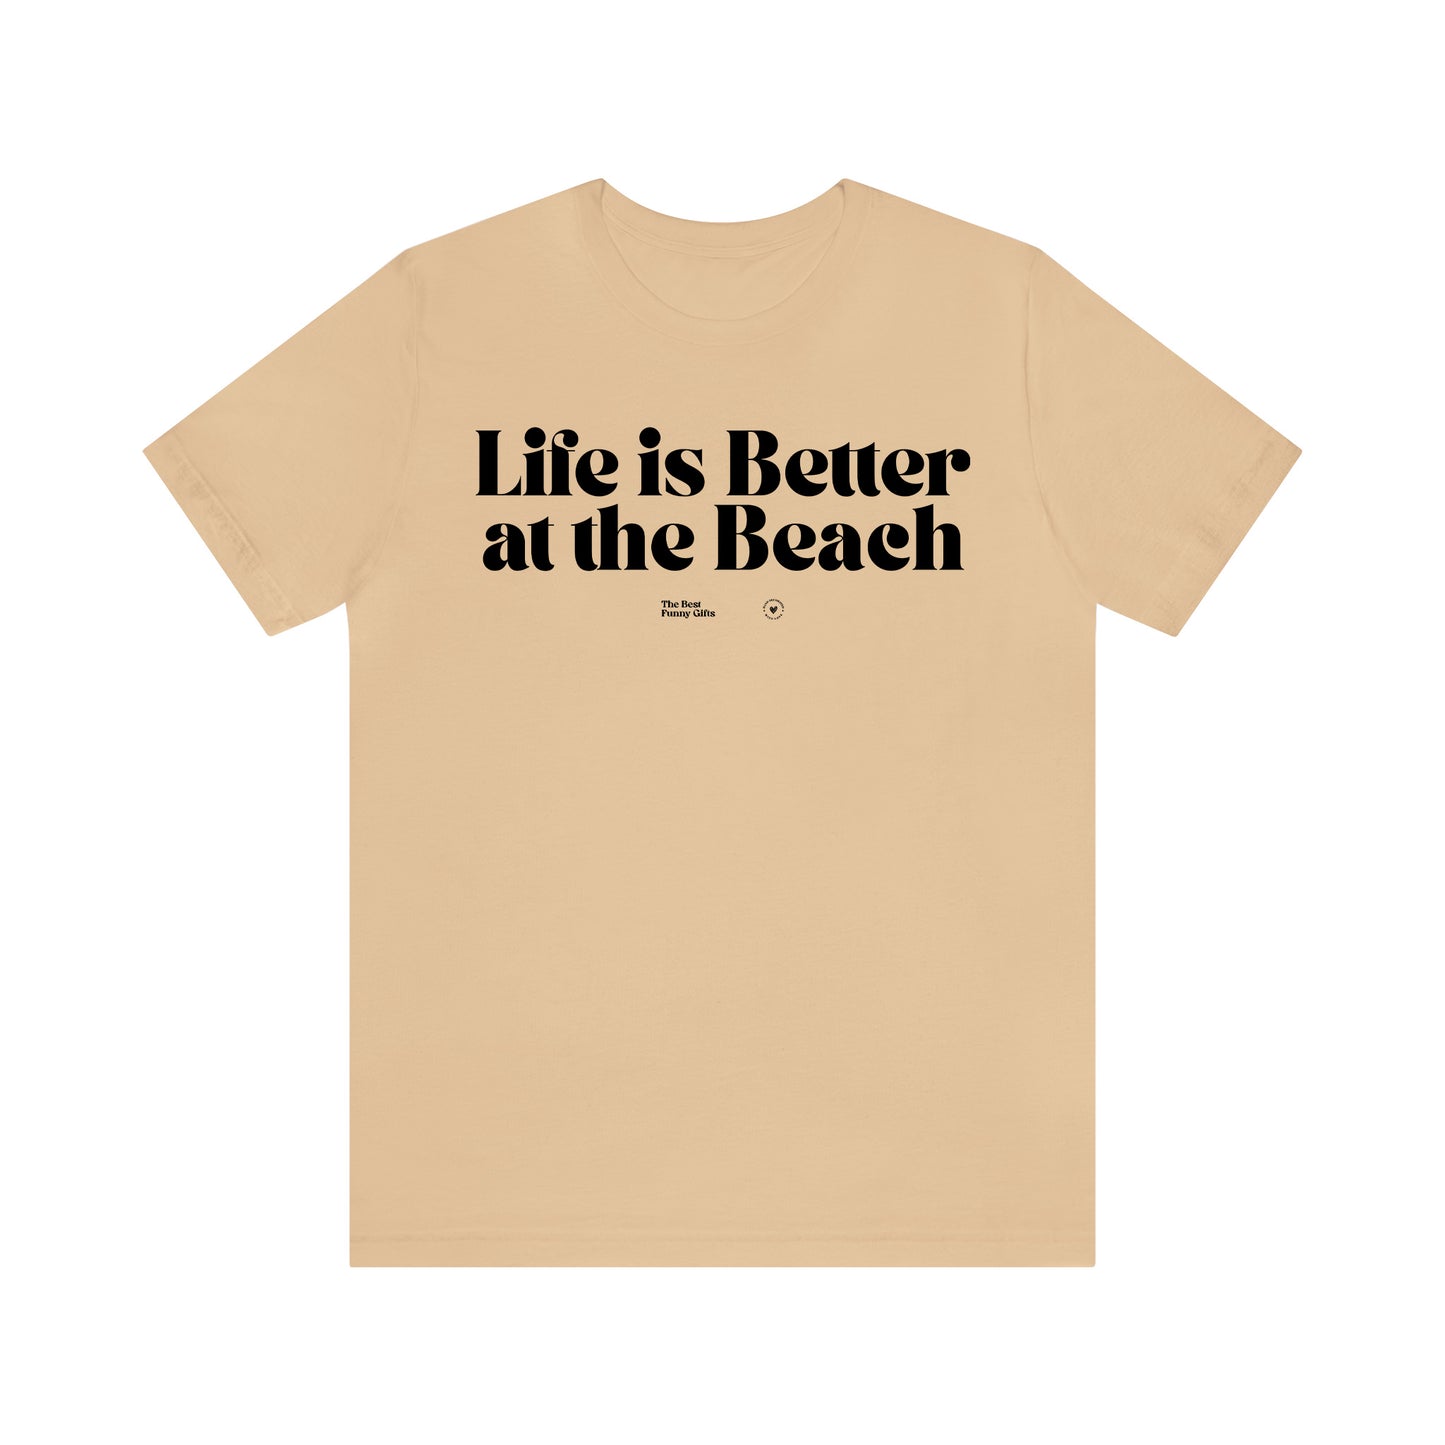 Funny Shirts for Women - Life is Better at the Beach - Women’s T Shirts